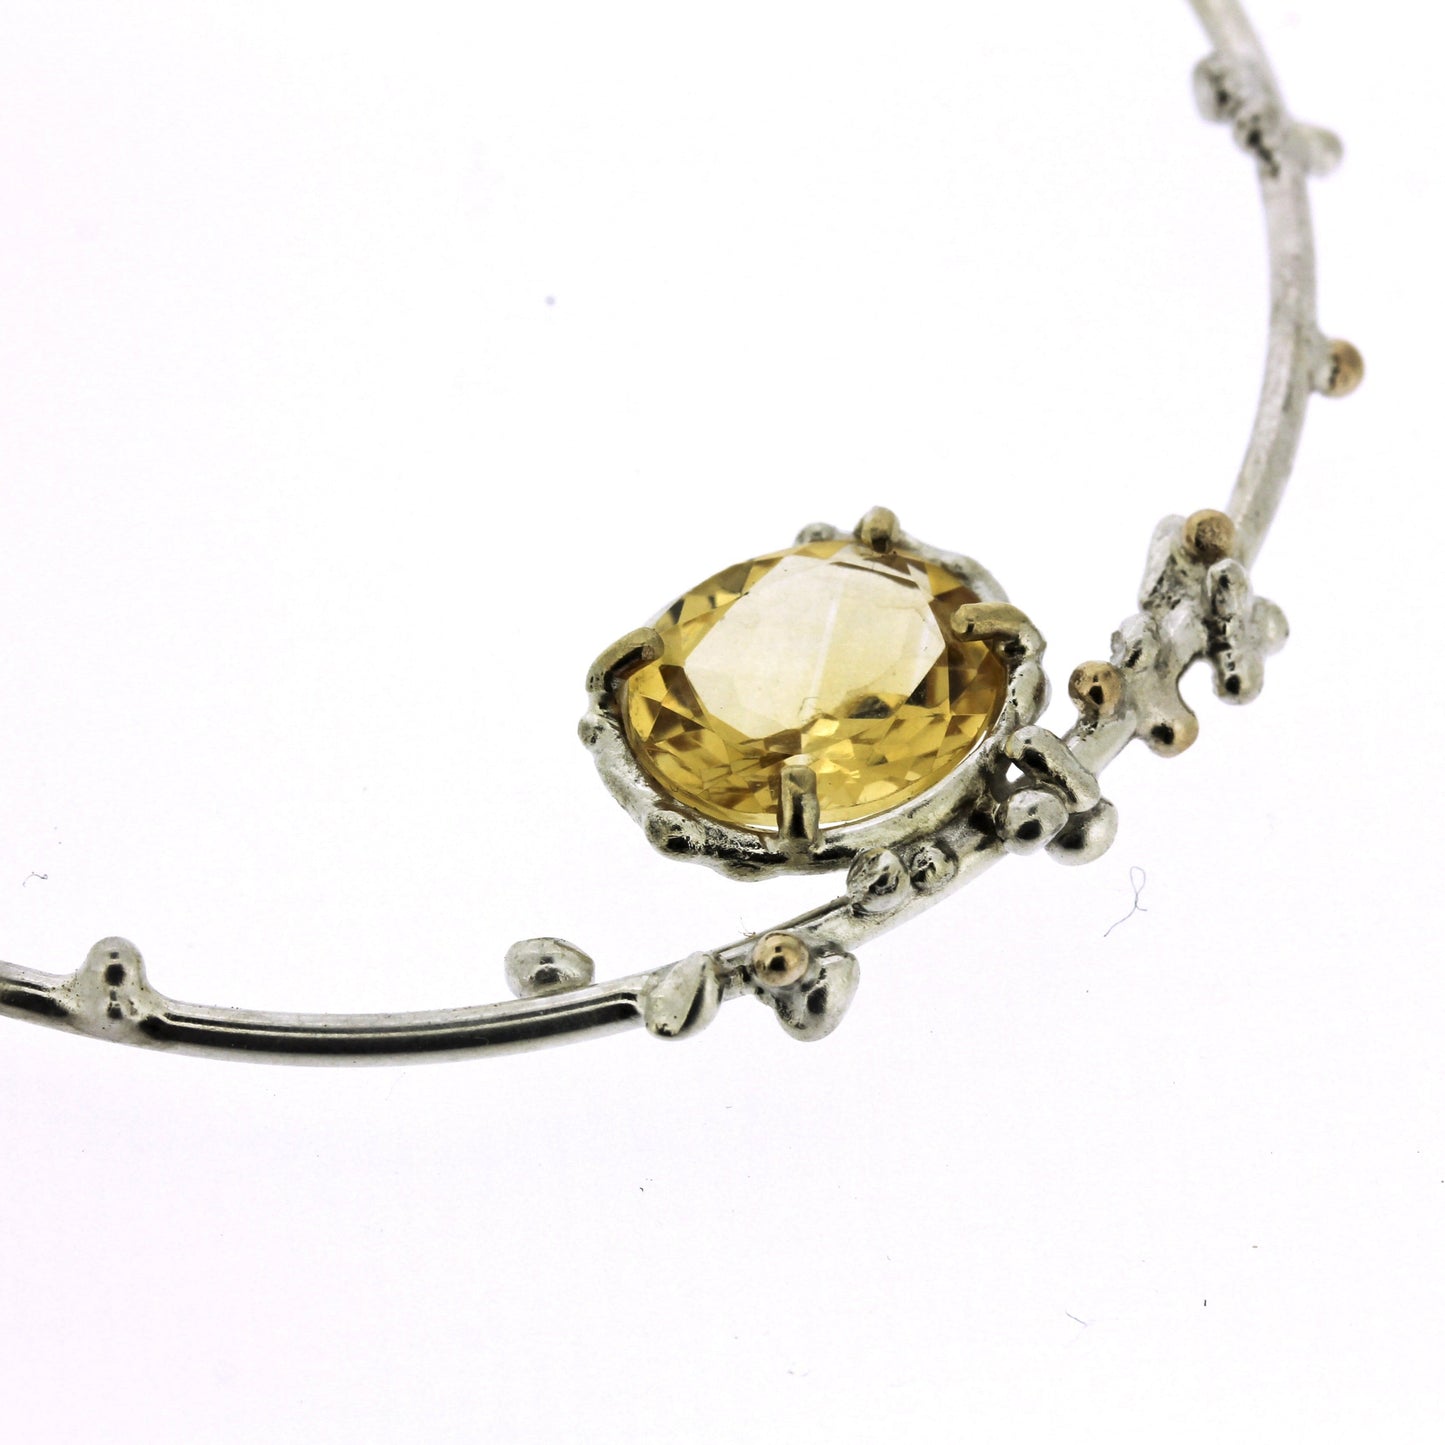 Detail shot of citrine on Trina Necklace.